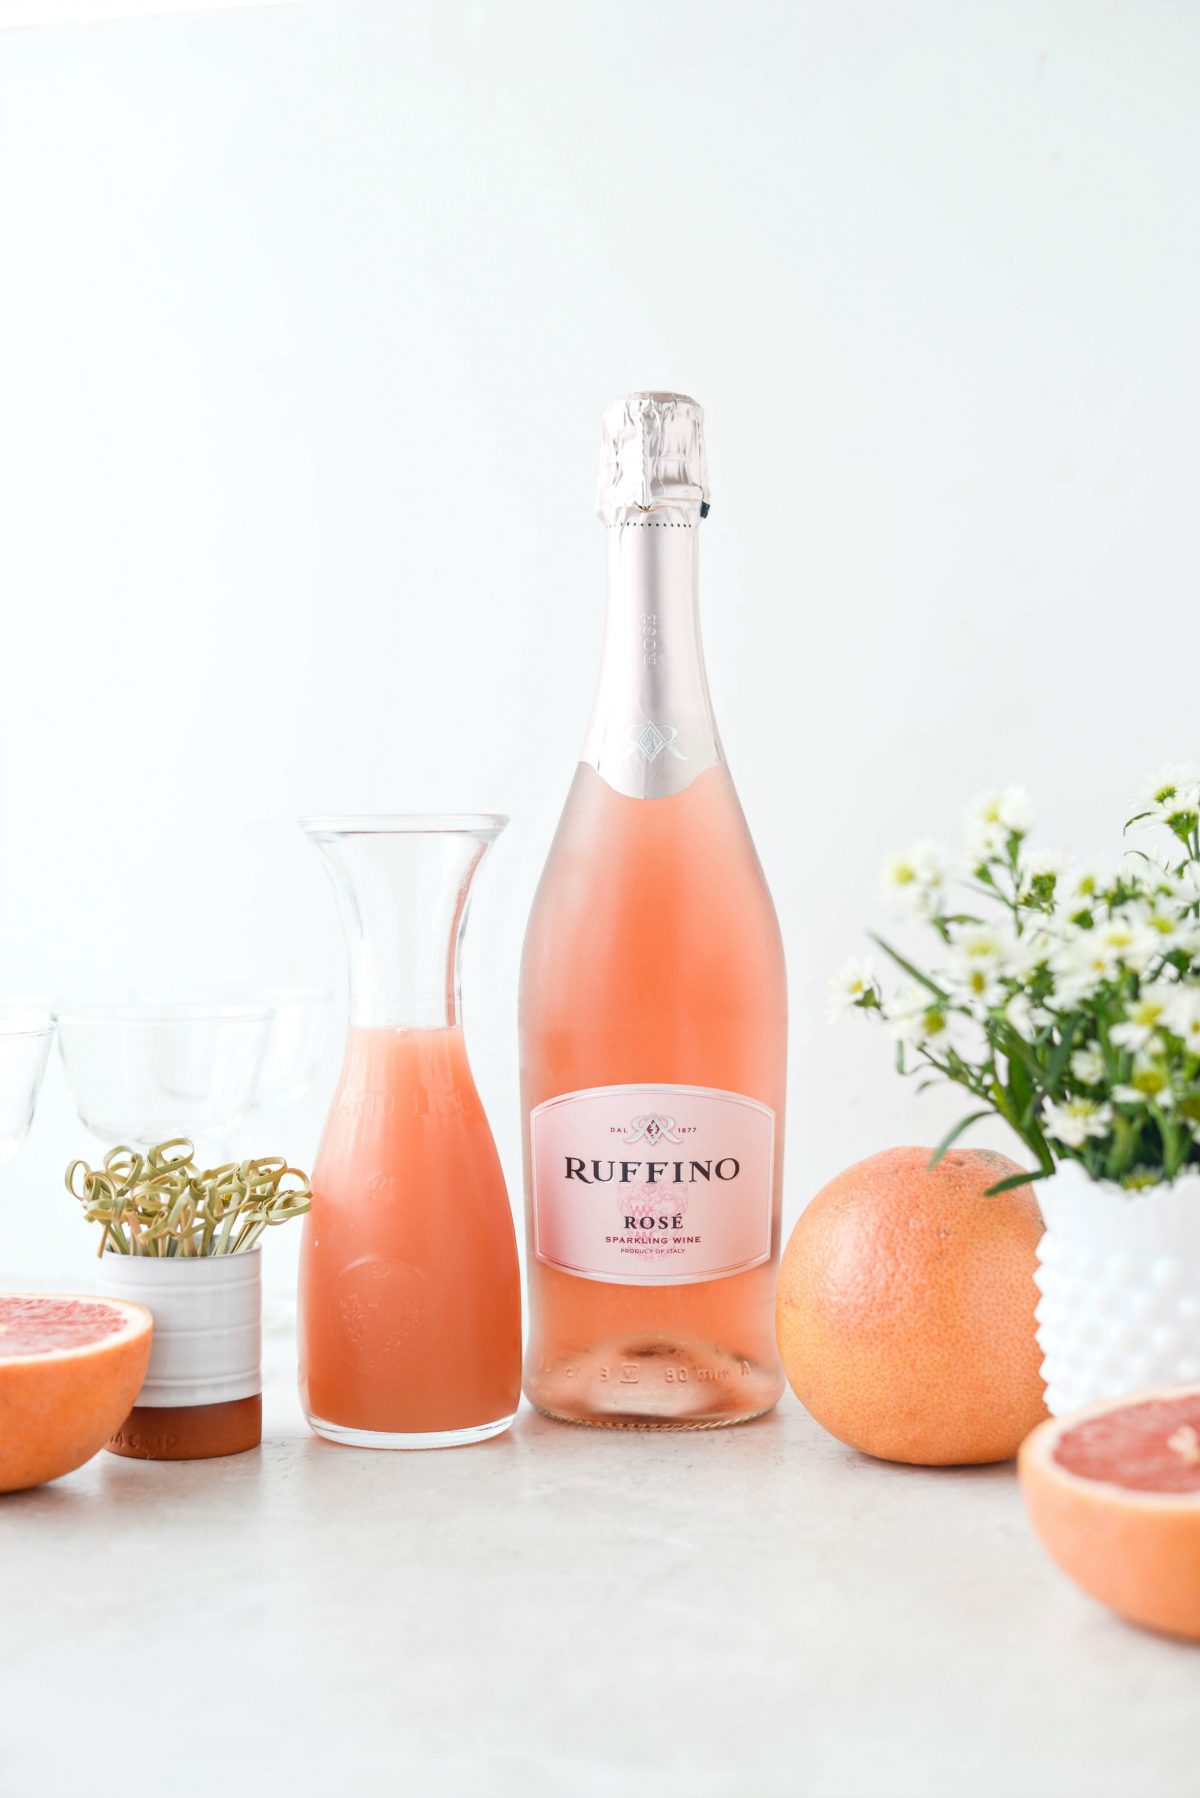  Greippirosee Mimosas l SimplyScratch.com #adult #beverage #greippi #rose #mimosa #easter #brunch #mothersday